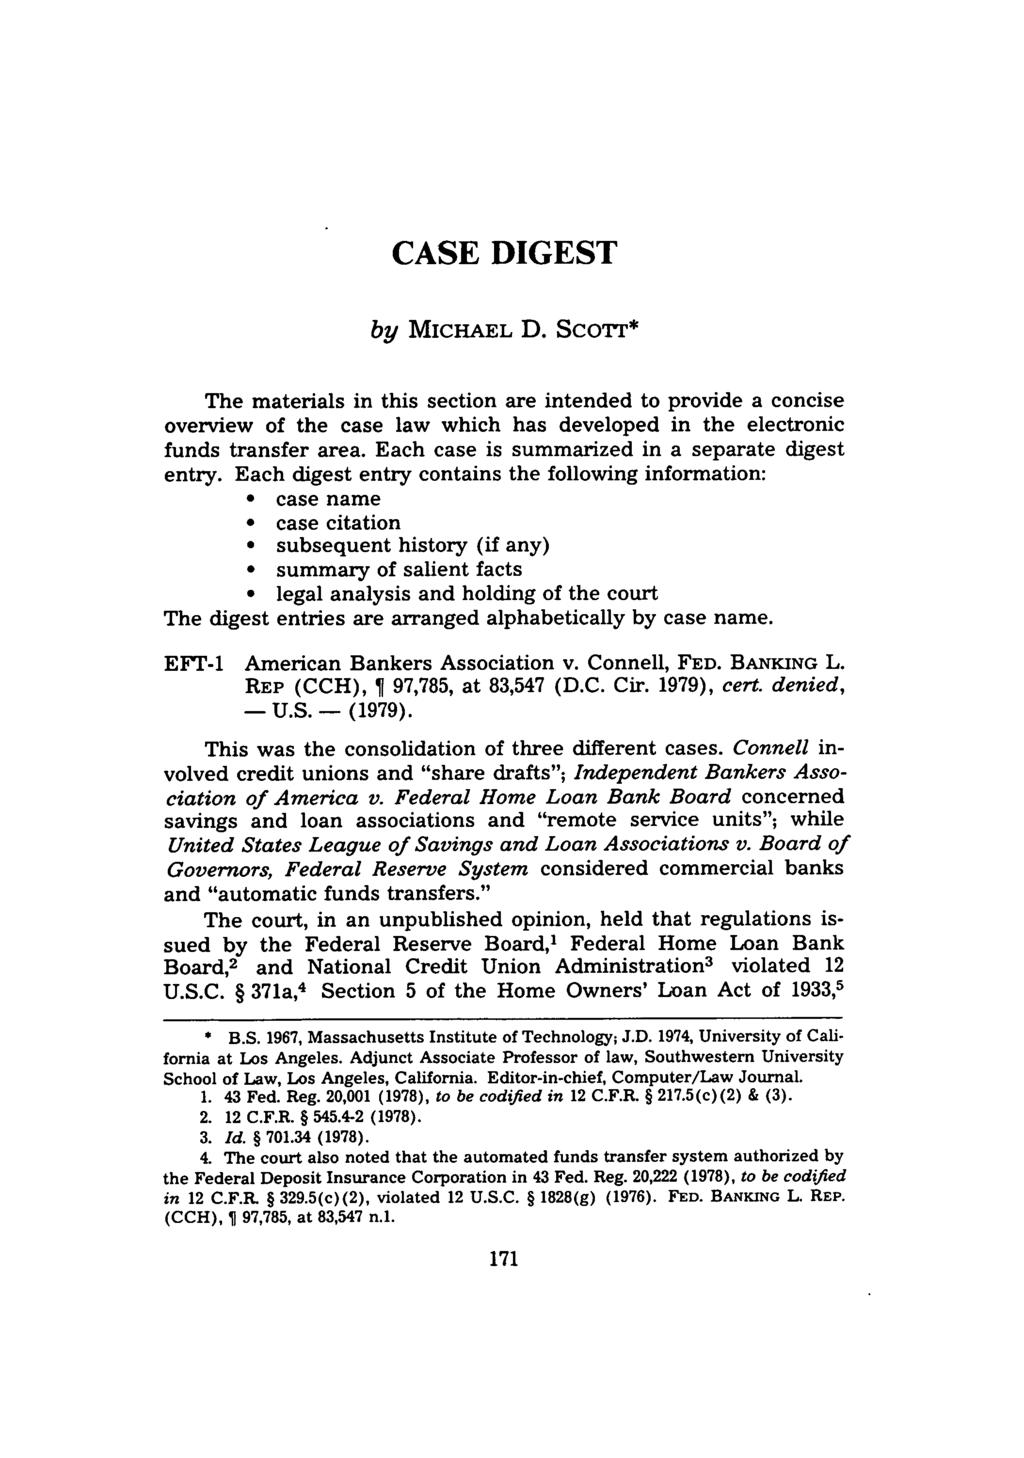 CASE DIGEST by MICHAEL D. Scor* The materials in this section are intended to provide a concise overview of the case law which has developed in the electronic funds transfer area.